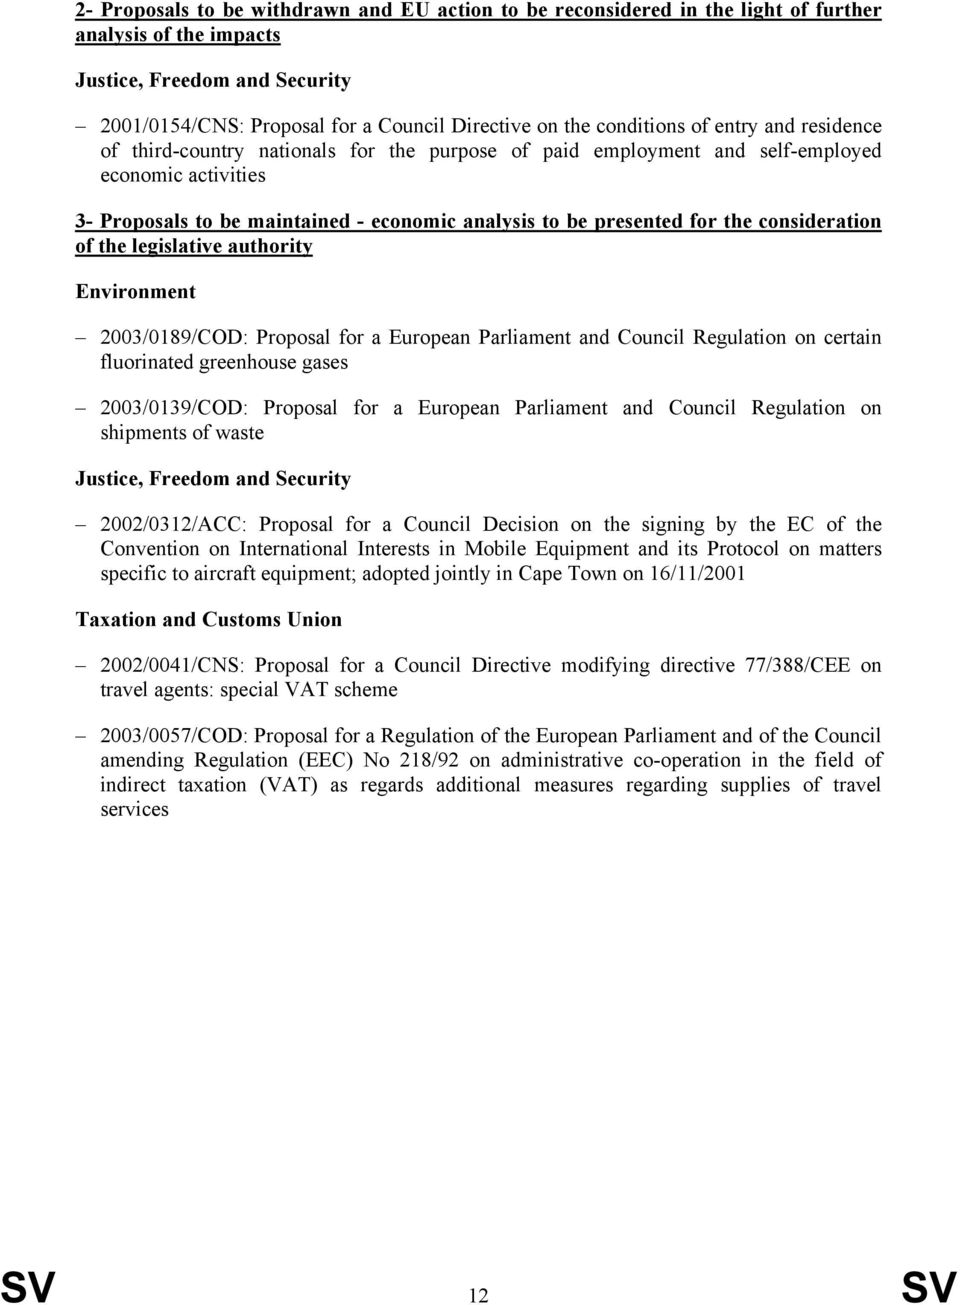 for the consideration of the legislative authority Environment 2003/0189/COD: Proposal for a European Parliament and Council Regulation on certain fluorinated greenhouse gases 2003/0139/COD: Proposal